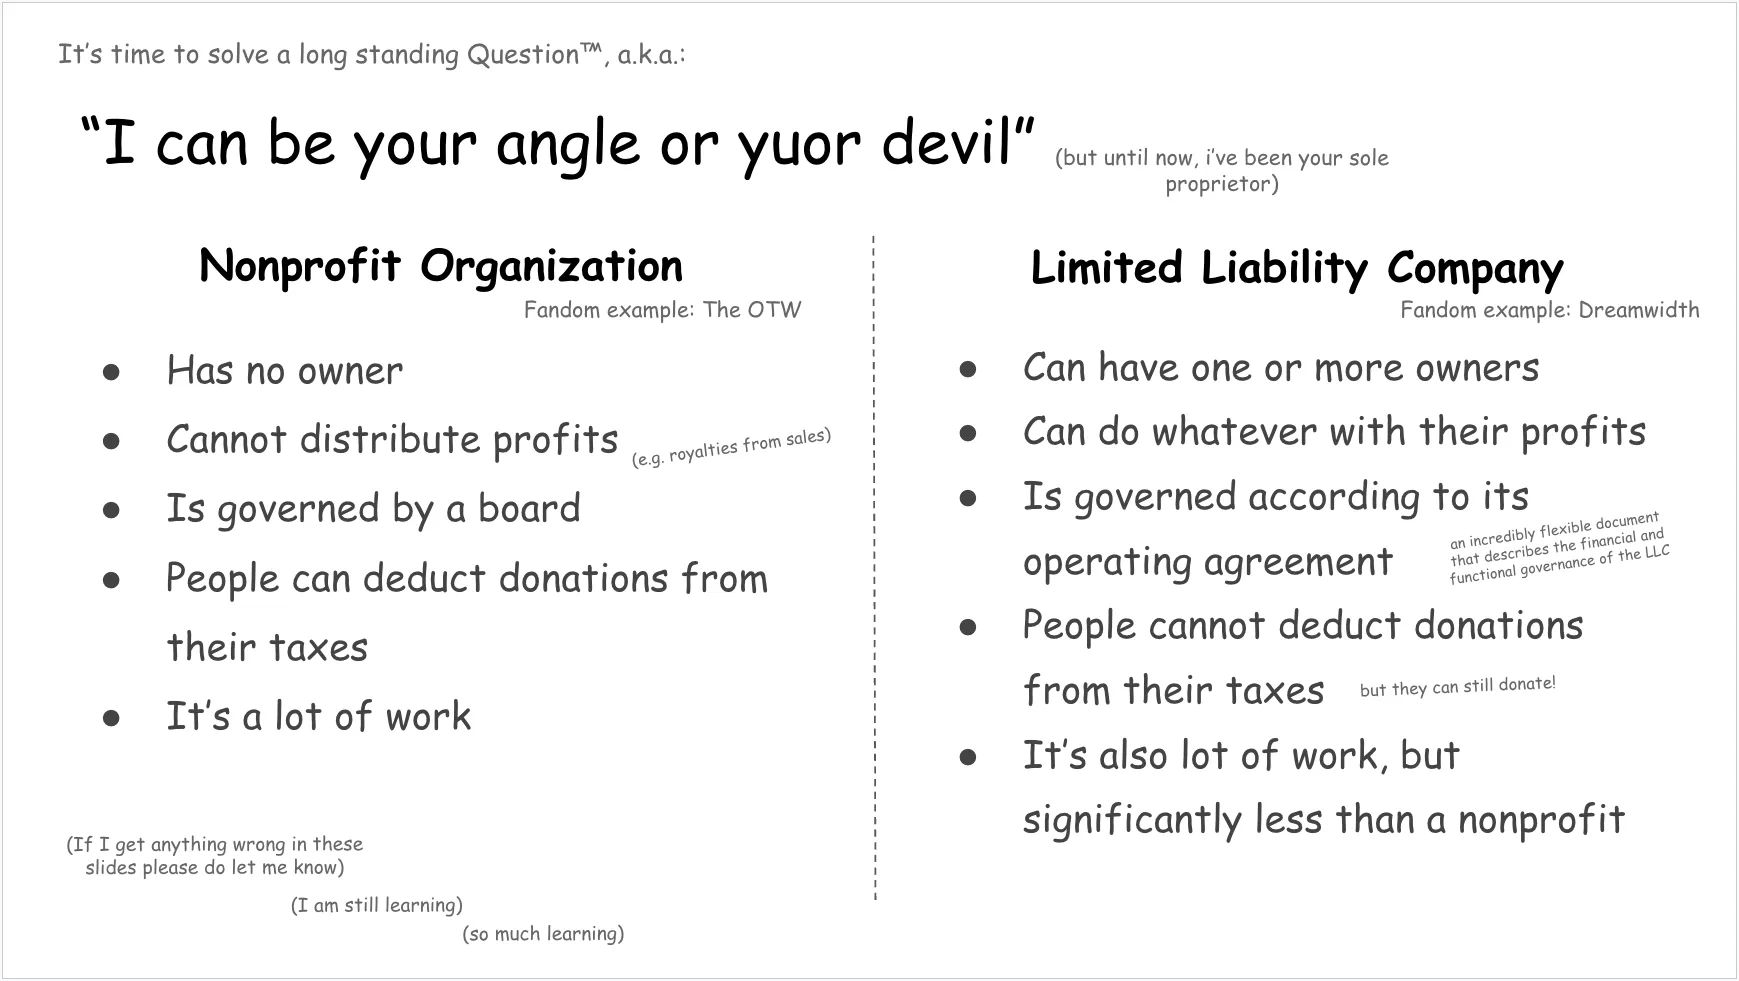 A presentation slide comparing nonprofit organizations with limited liability companies. Full text follows:

It’s time to solve a long standing Question™, a.k.a.: “I can be your angle or yuor devil” (but until now, i’ve been your sole proprietor)

On one side:
Nonprofit Organization (fandom example: The OTW)
Has no owner
Cannot distribute profits (e.g. royalties from sales)
Is governed by a board
People can deduct donations from their taxes
It’s a lot of work

On the other side:
Limited Liability Company (fandom example: Dreamwidth)
Can have one or more owners
Can do whatever with their profits
Is governed according to its operating agreement (an incredibly flexible document that describes the financial and functional governance of the LLC)
People cannot deduct donations from their taxes (but they can still donate!)
It’s also lot of work, but significantly less than a nonprofit

At the bottom:
(If I get anything wrong in these slides please do let me know)
(I am still learning)
(so much learning)
